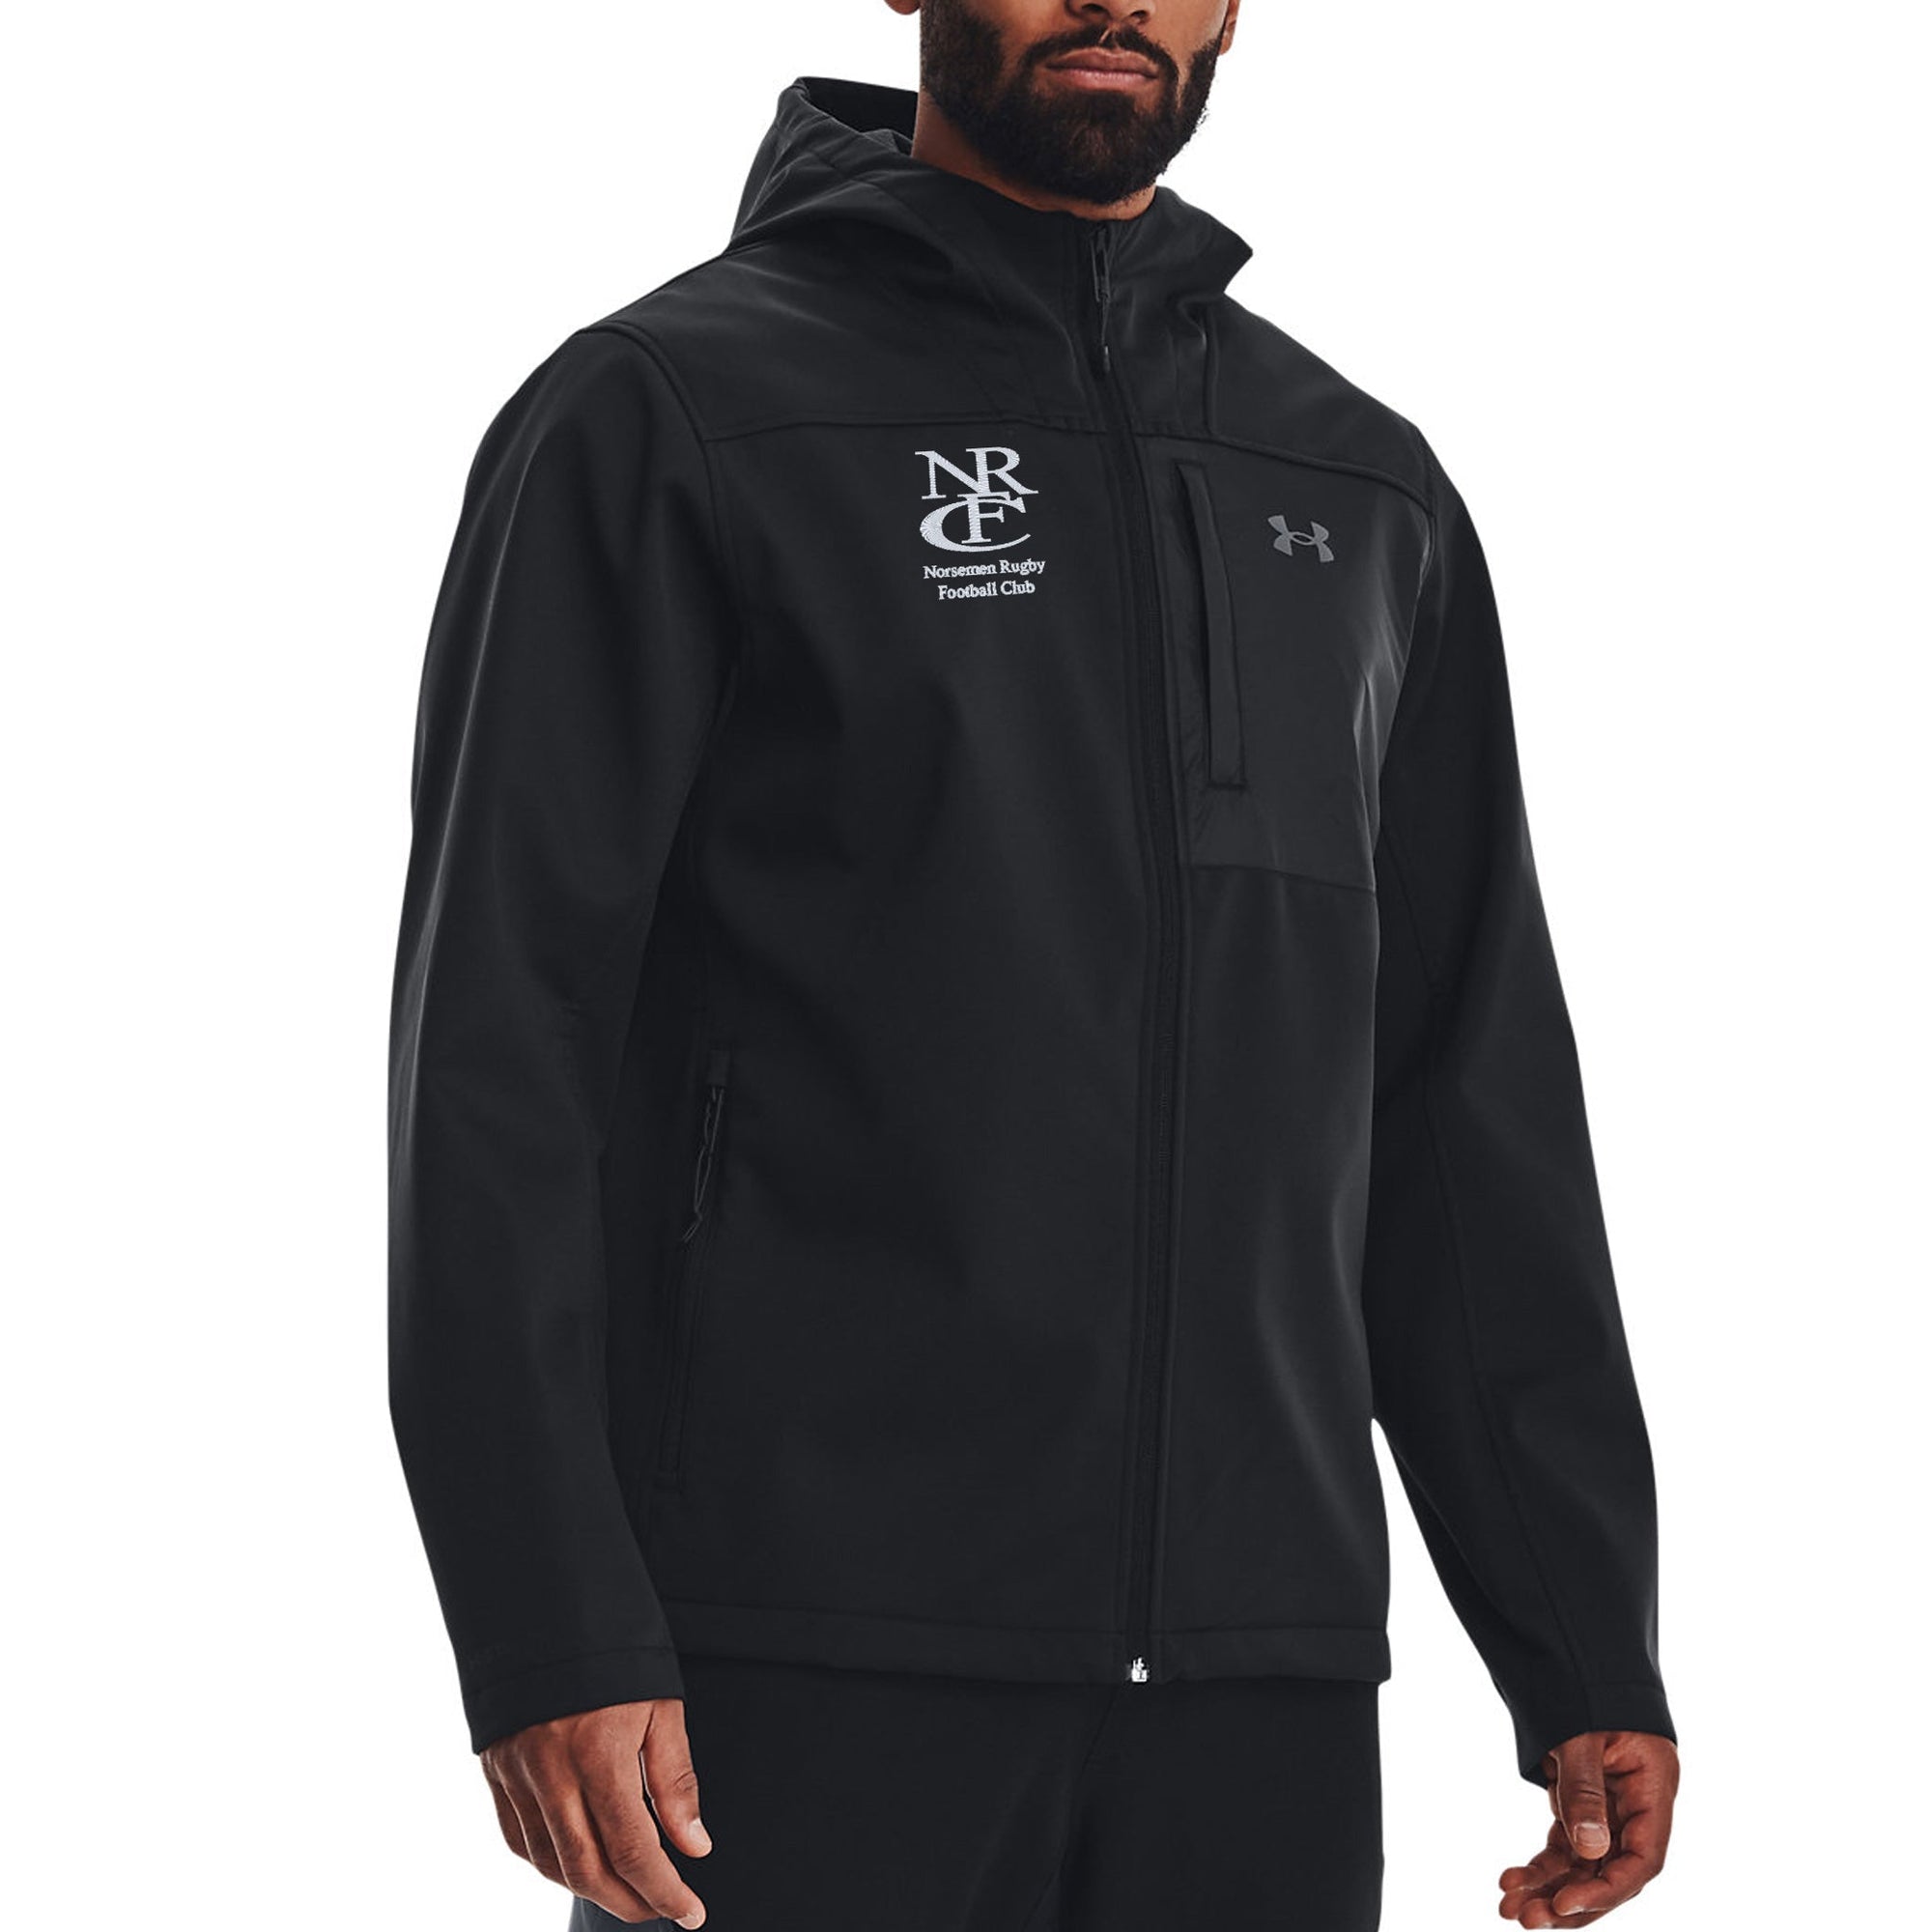 Rugby Imports Norsemen RFC Coldgear Hooded Infrared Jacket